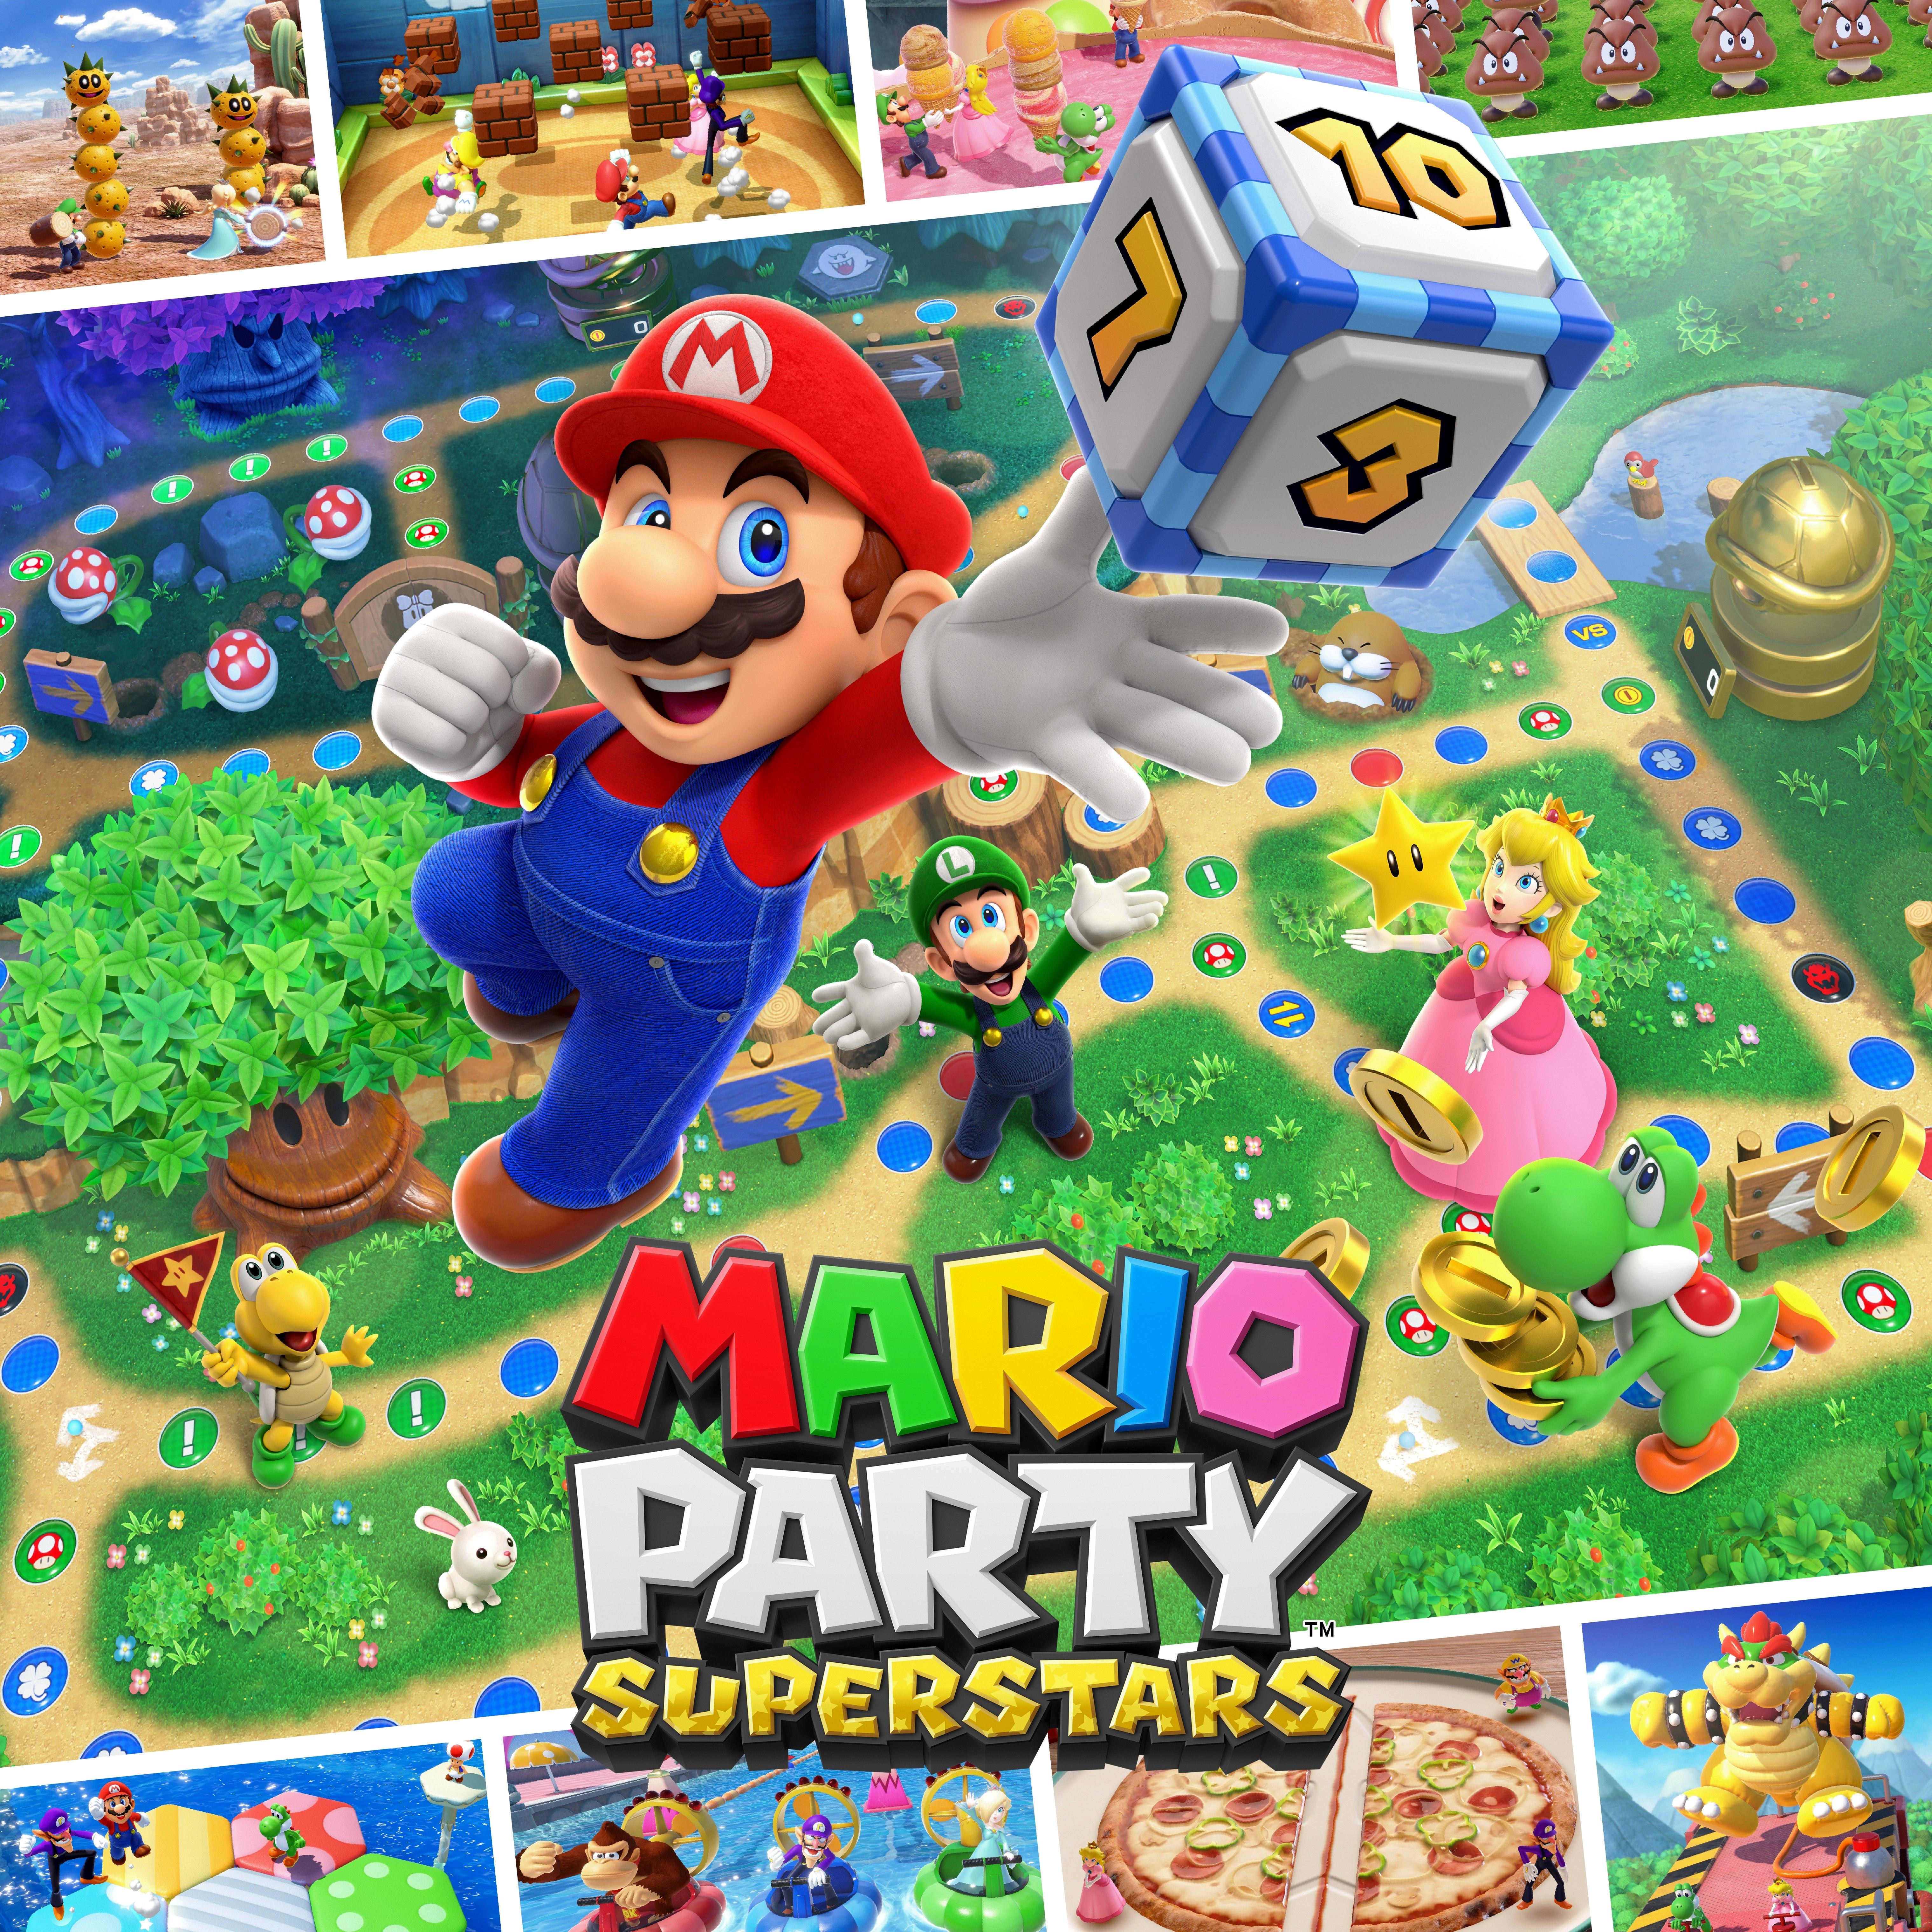 How Long Does Mario Party Superstars Take To Download? 5